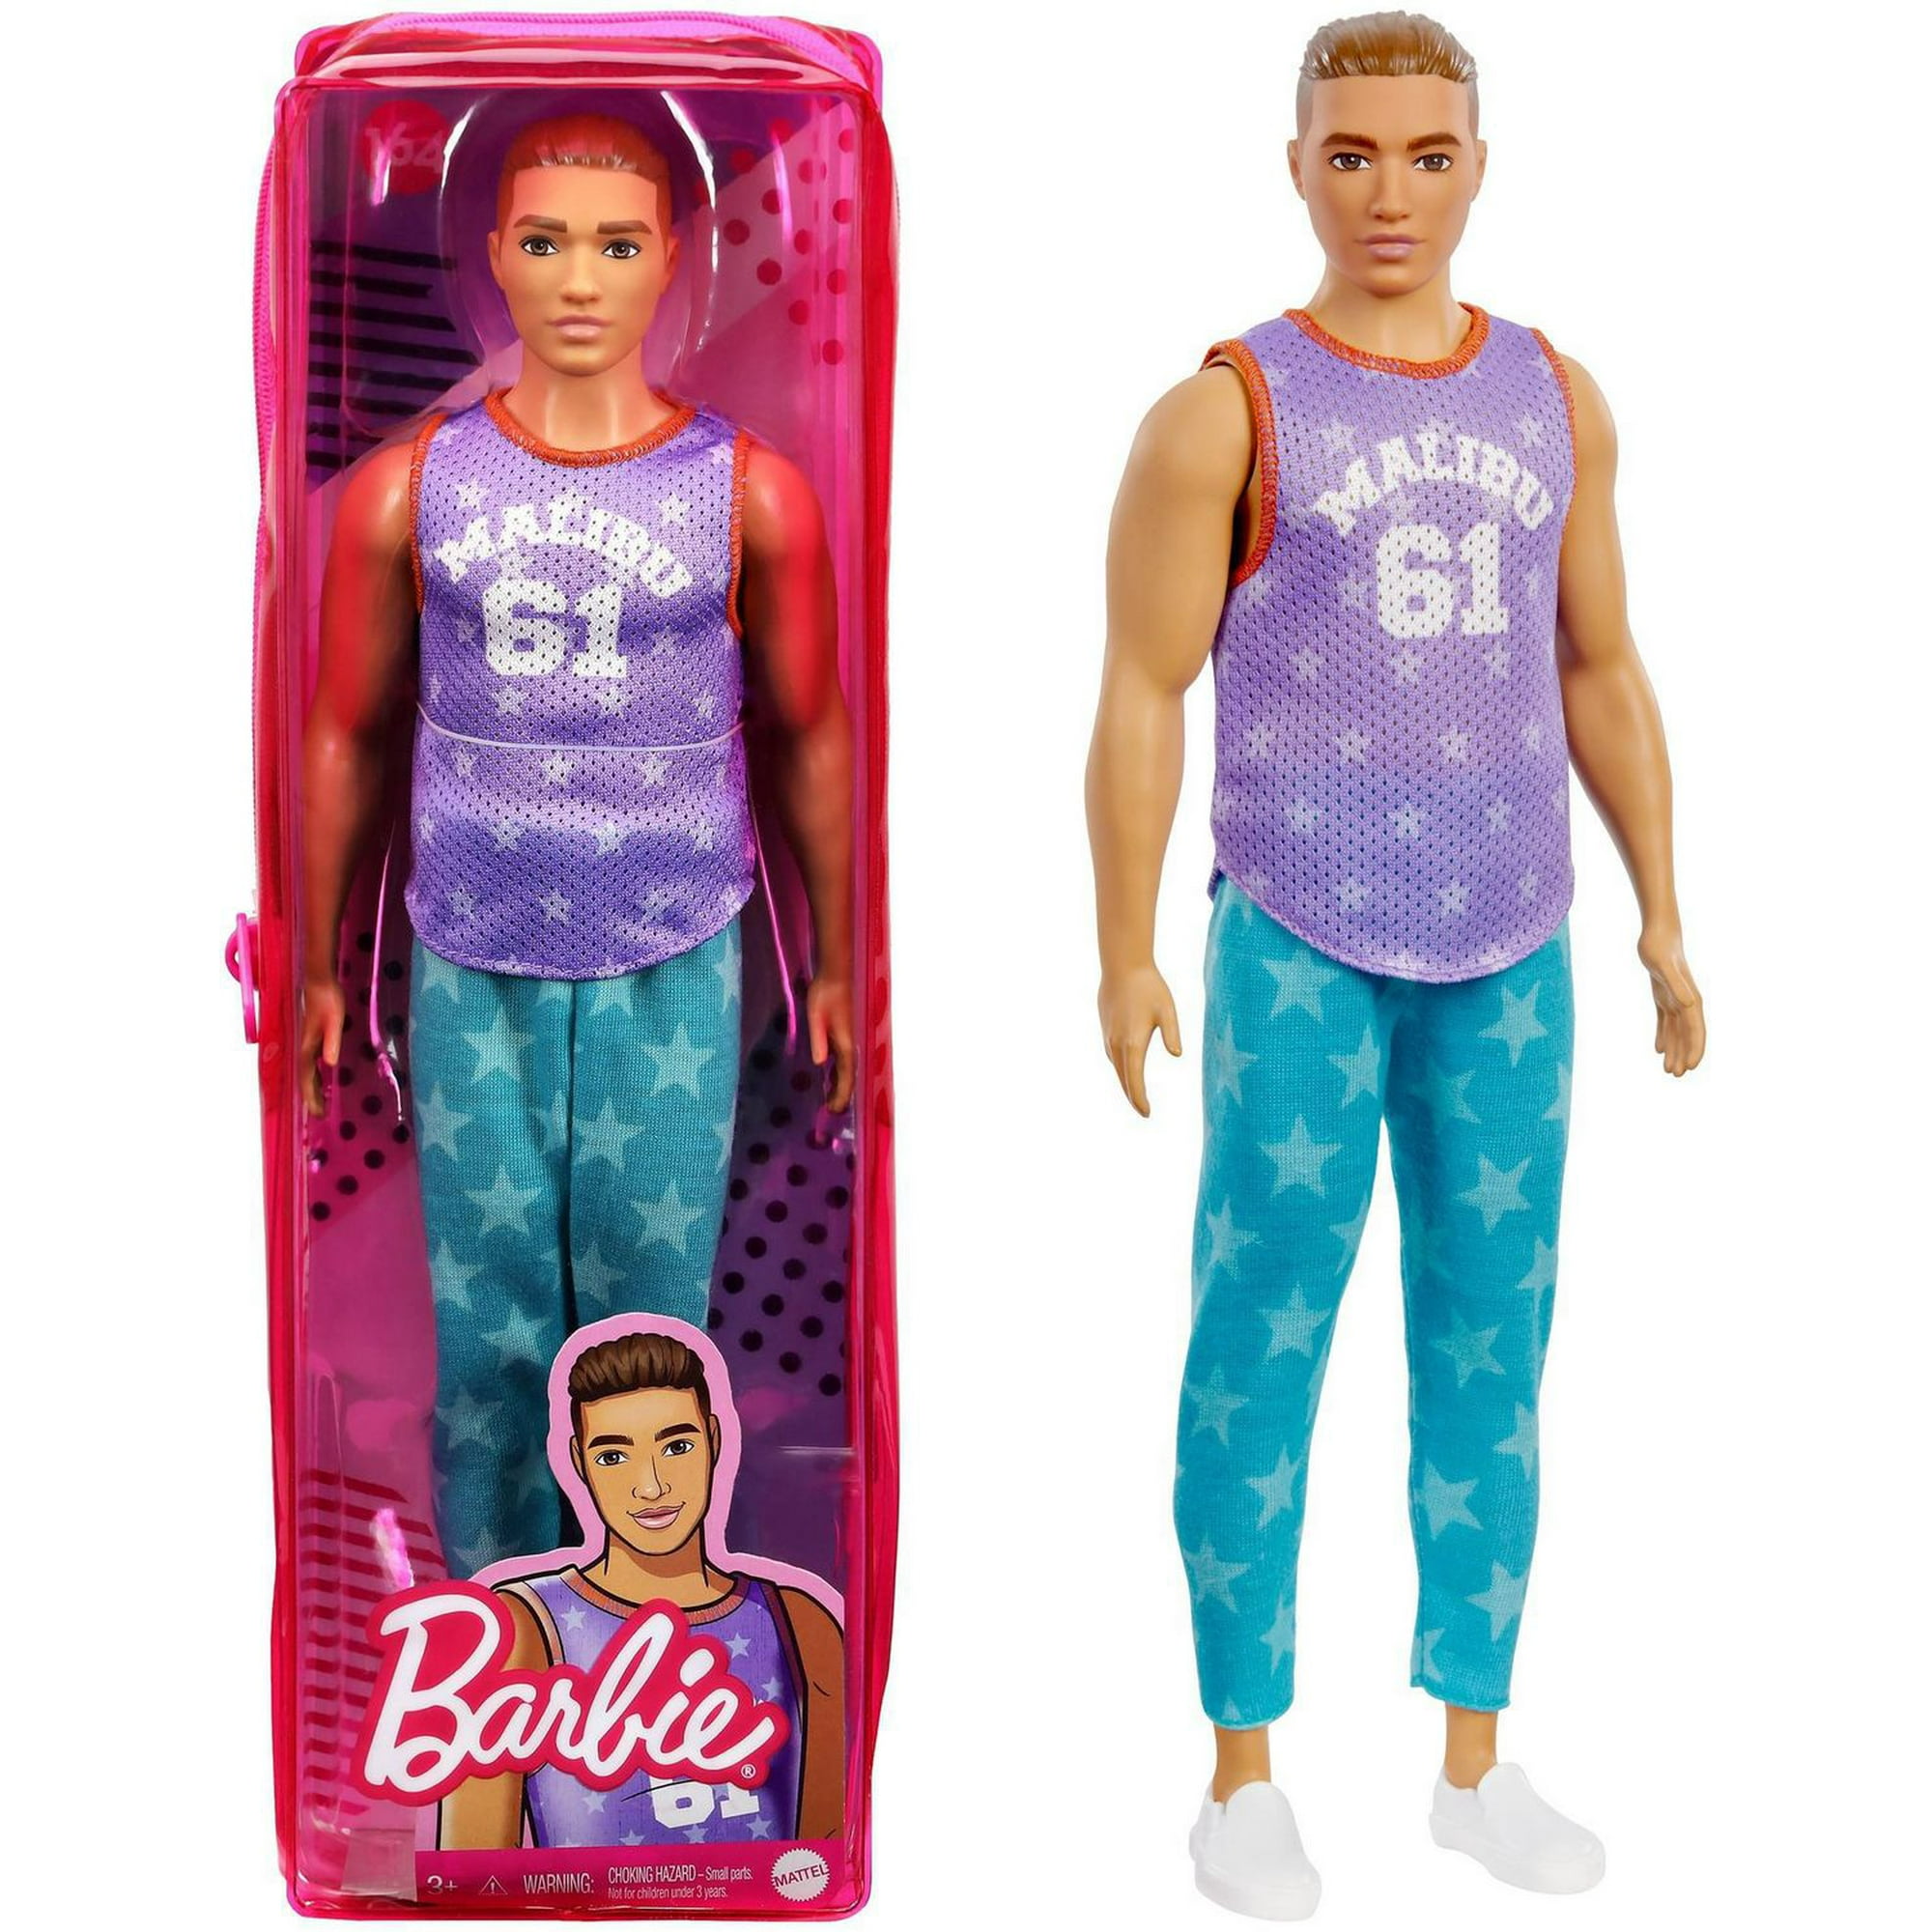 Barbie Ken Fashionistas Doll #165 with Sculpted Brown Hair Wearing Purple  “Malibu” Top, Blue Starred Joggers & White Shoes 